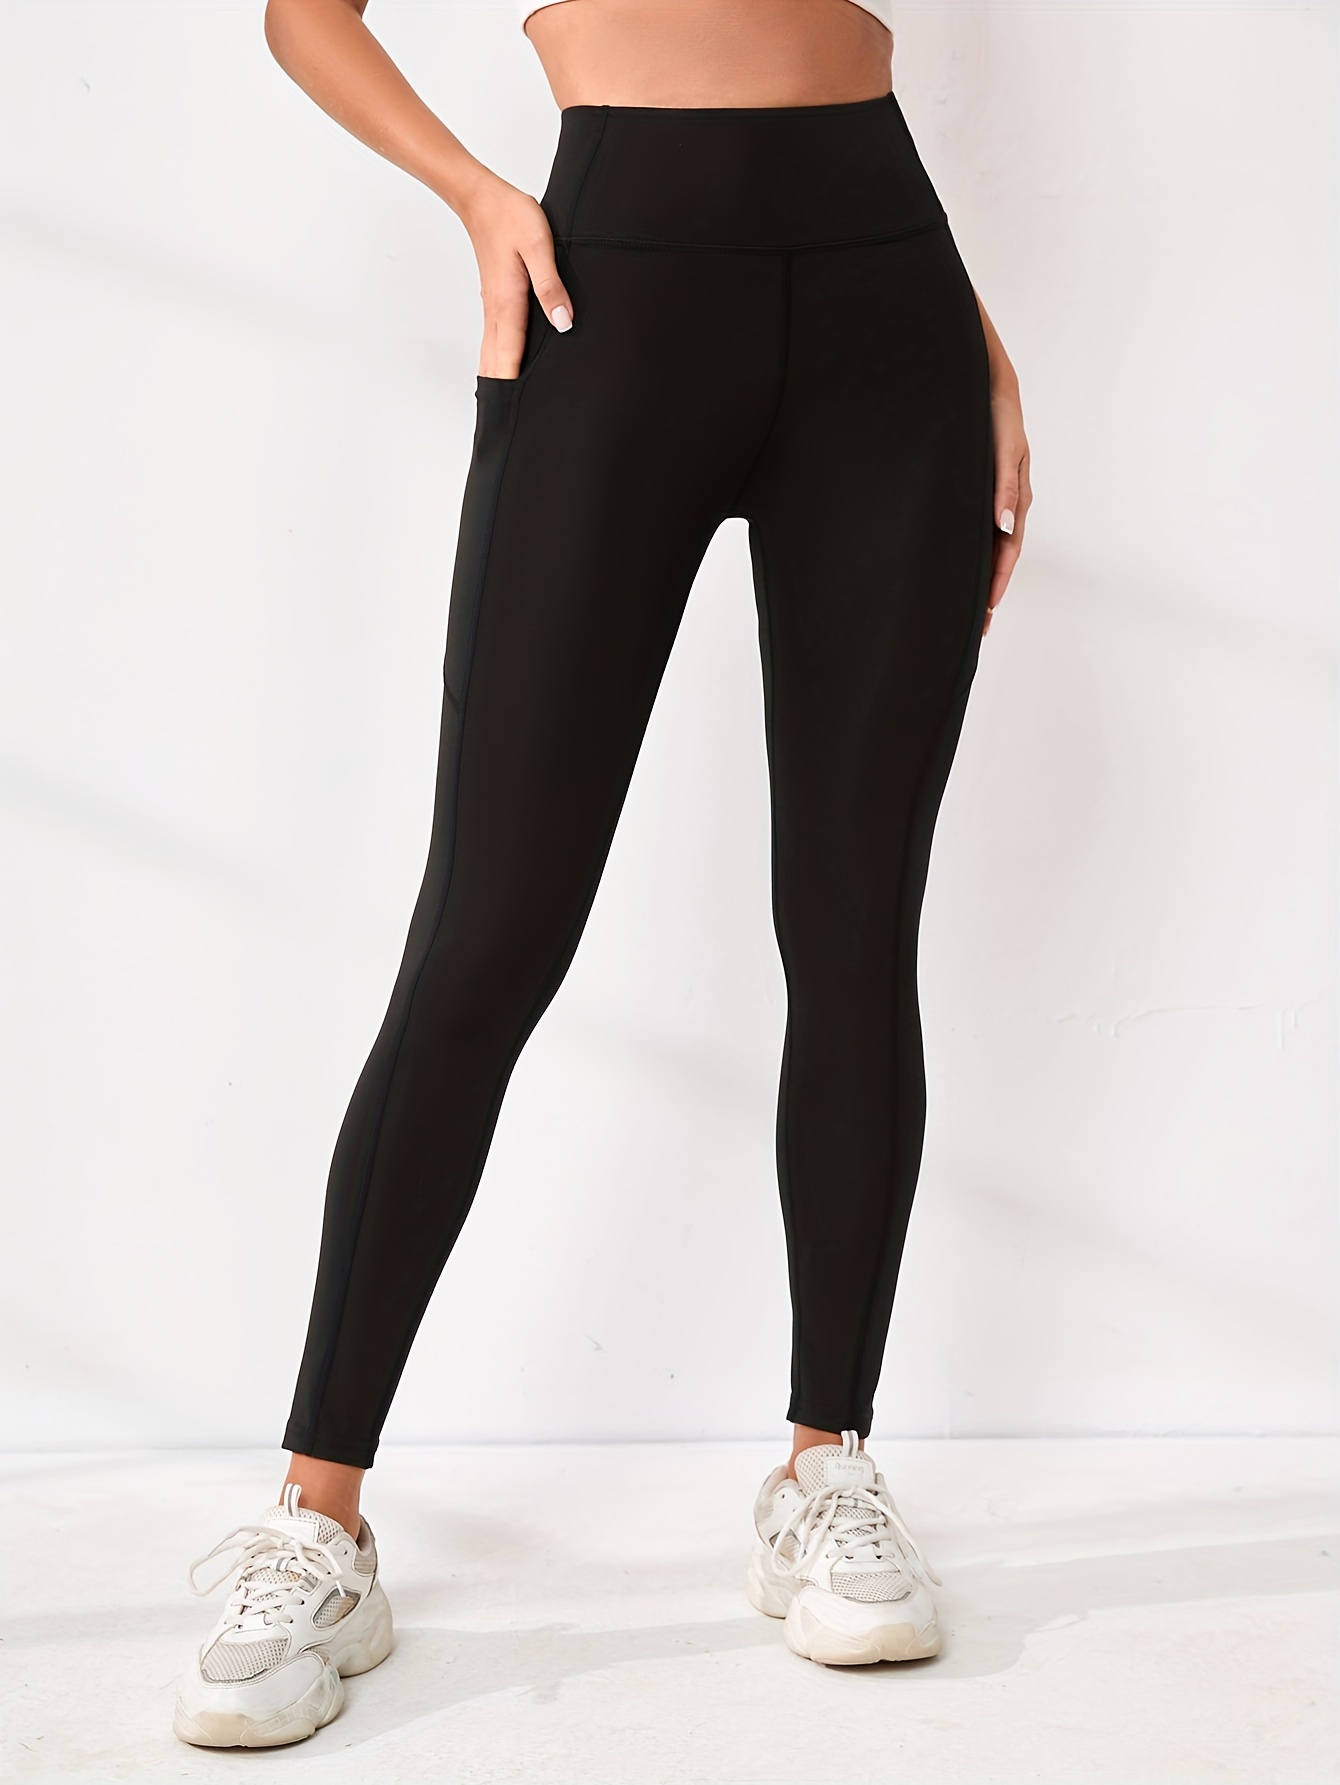 High Waisted Yoga Full Length Leggings With Pockets For Women And